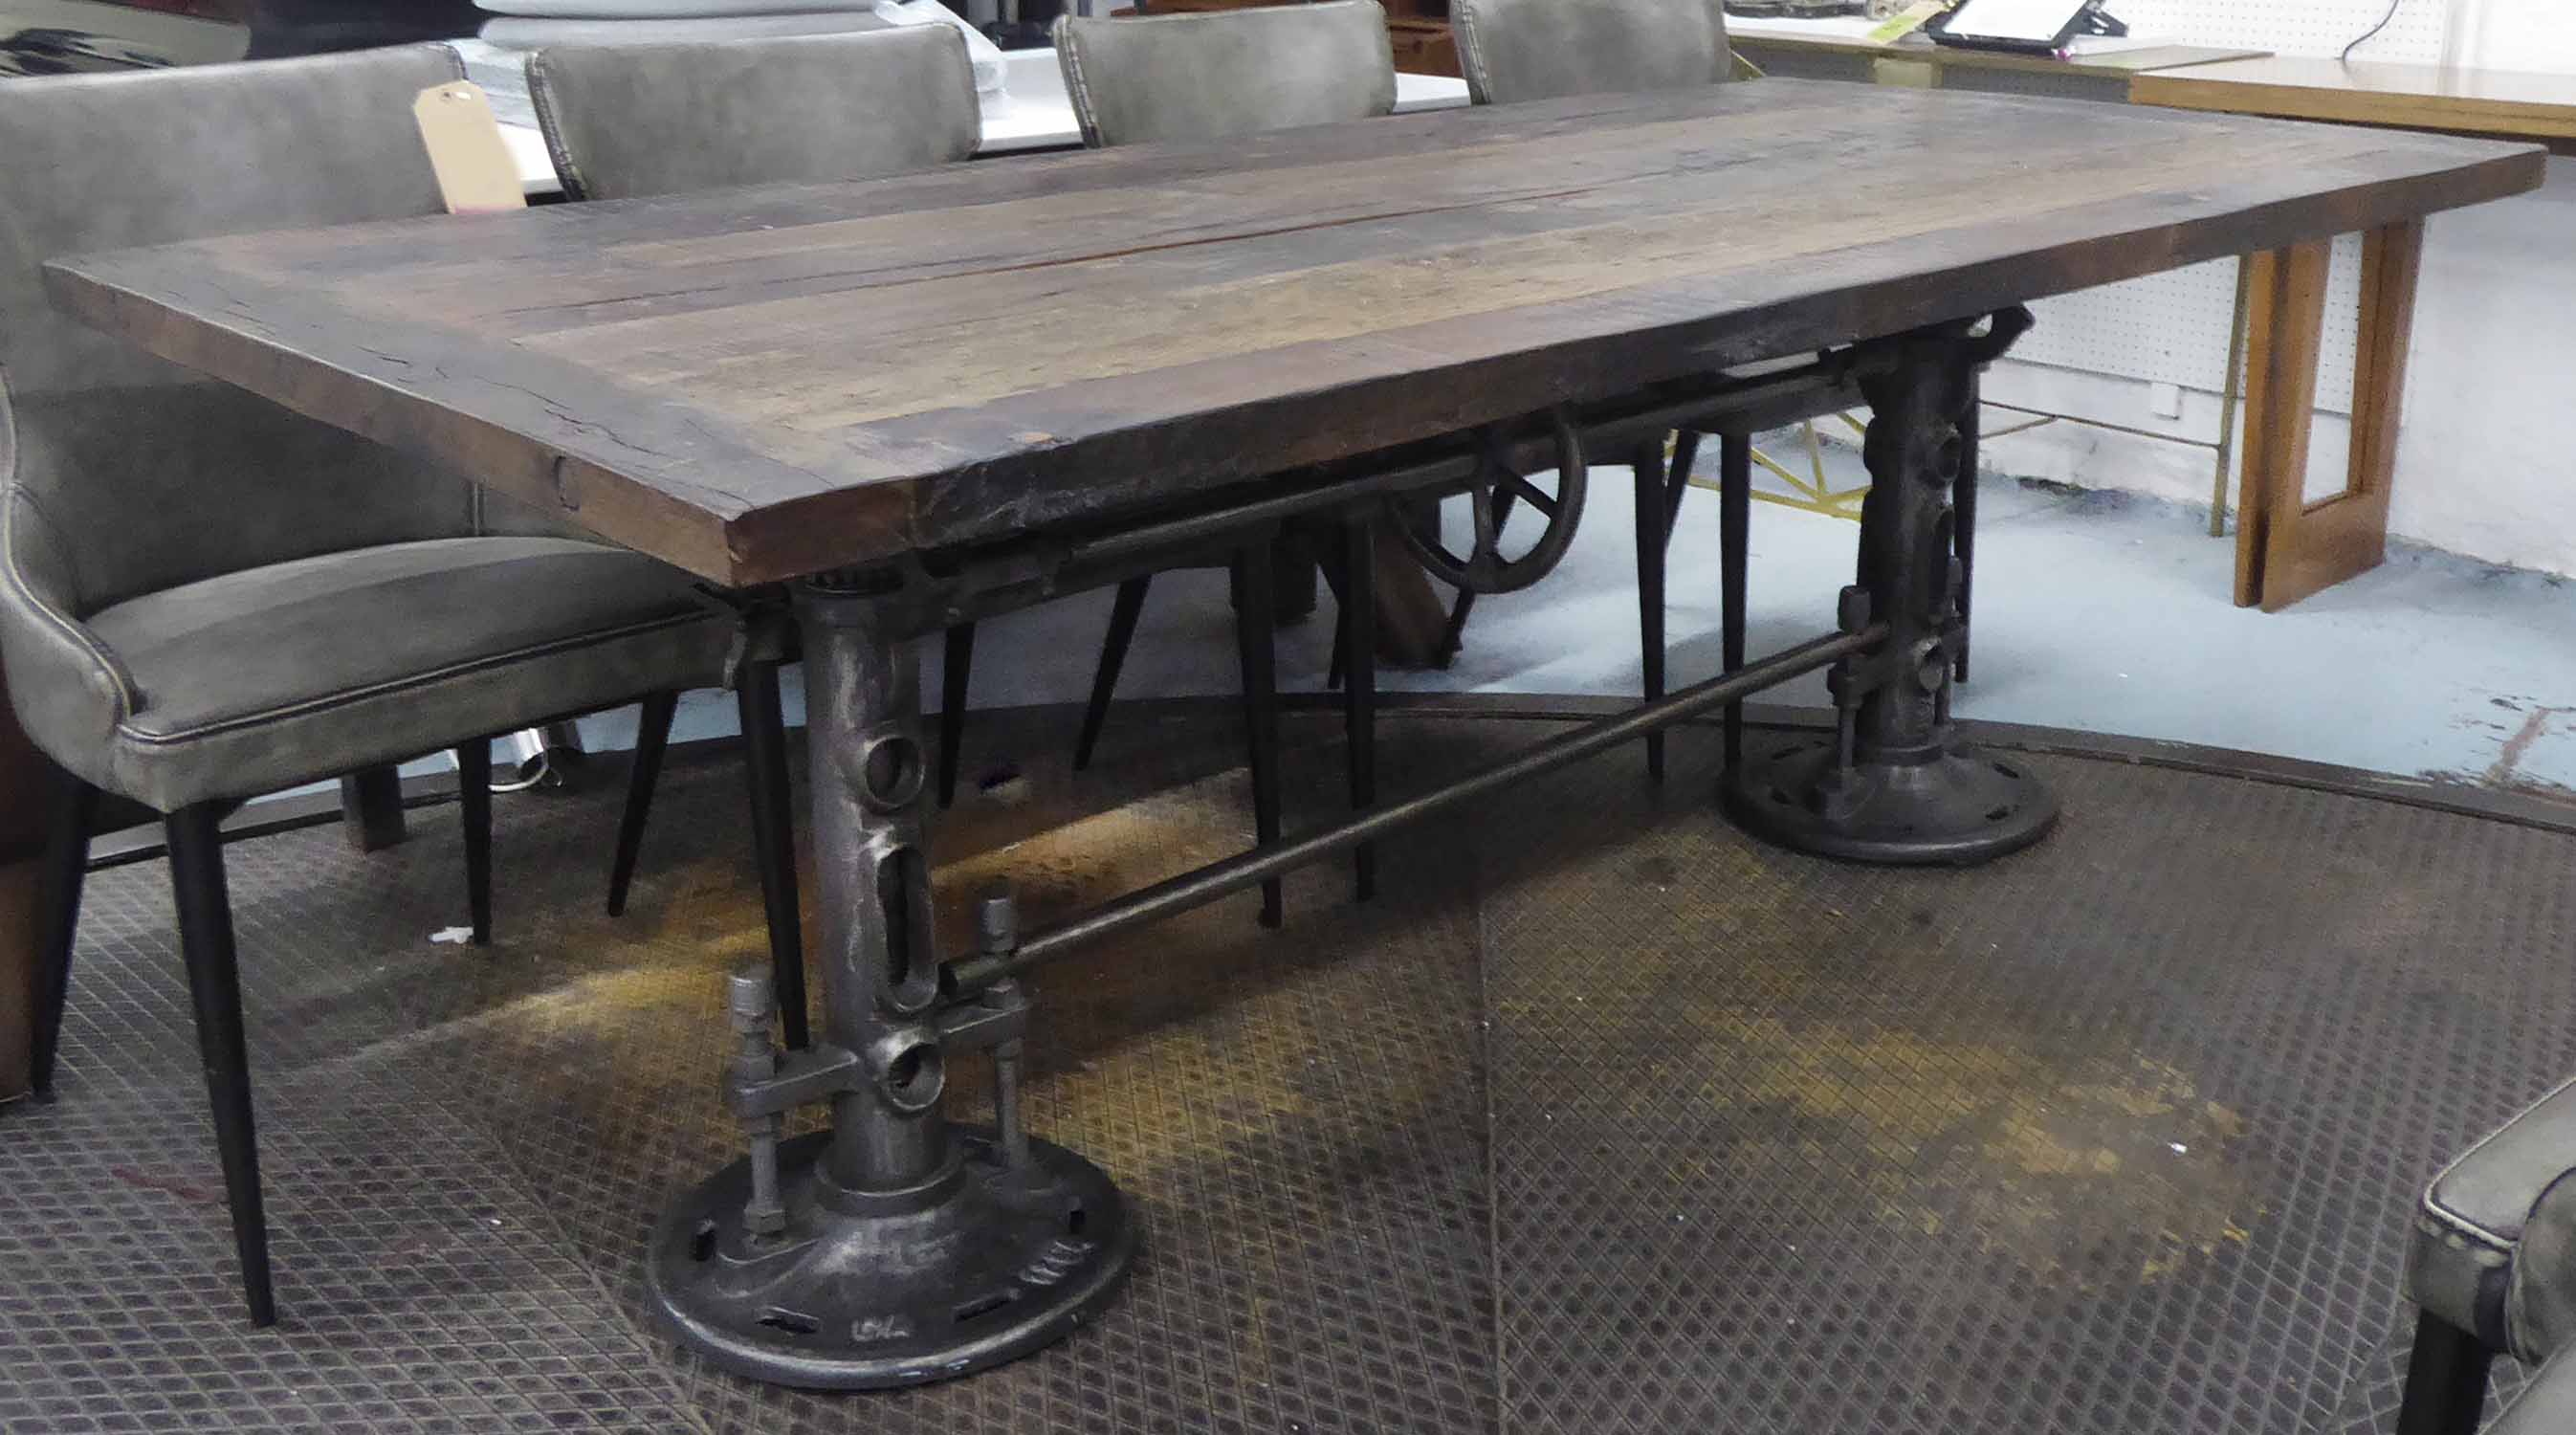 INDUSTRIAL STYLE DINING TABLE, with a rectangular reclaimed wooden top, 210cm L x 77cm H x 100cm D.